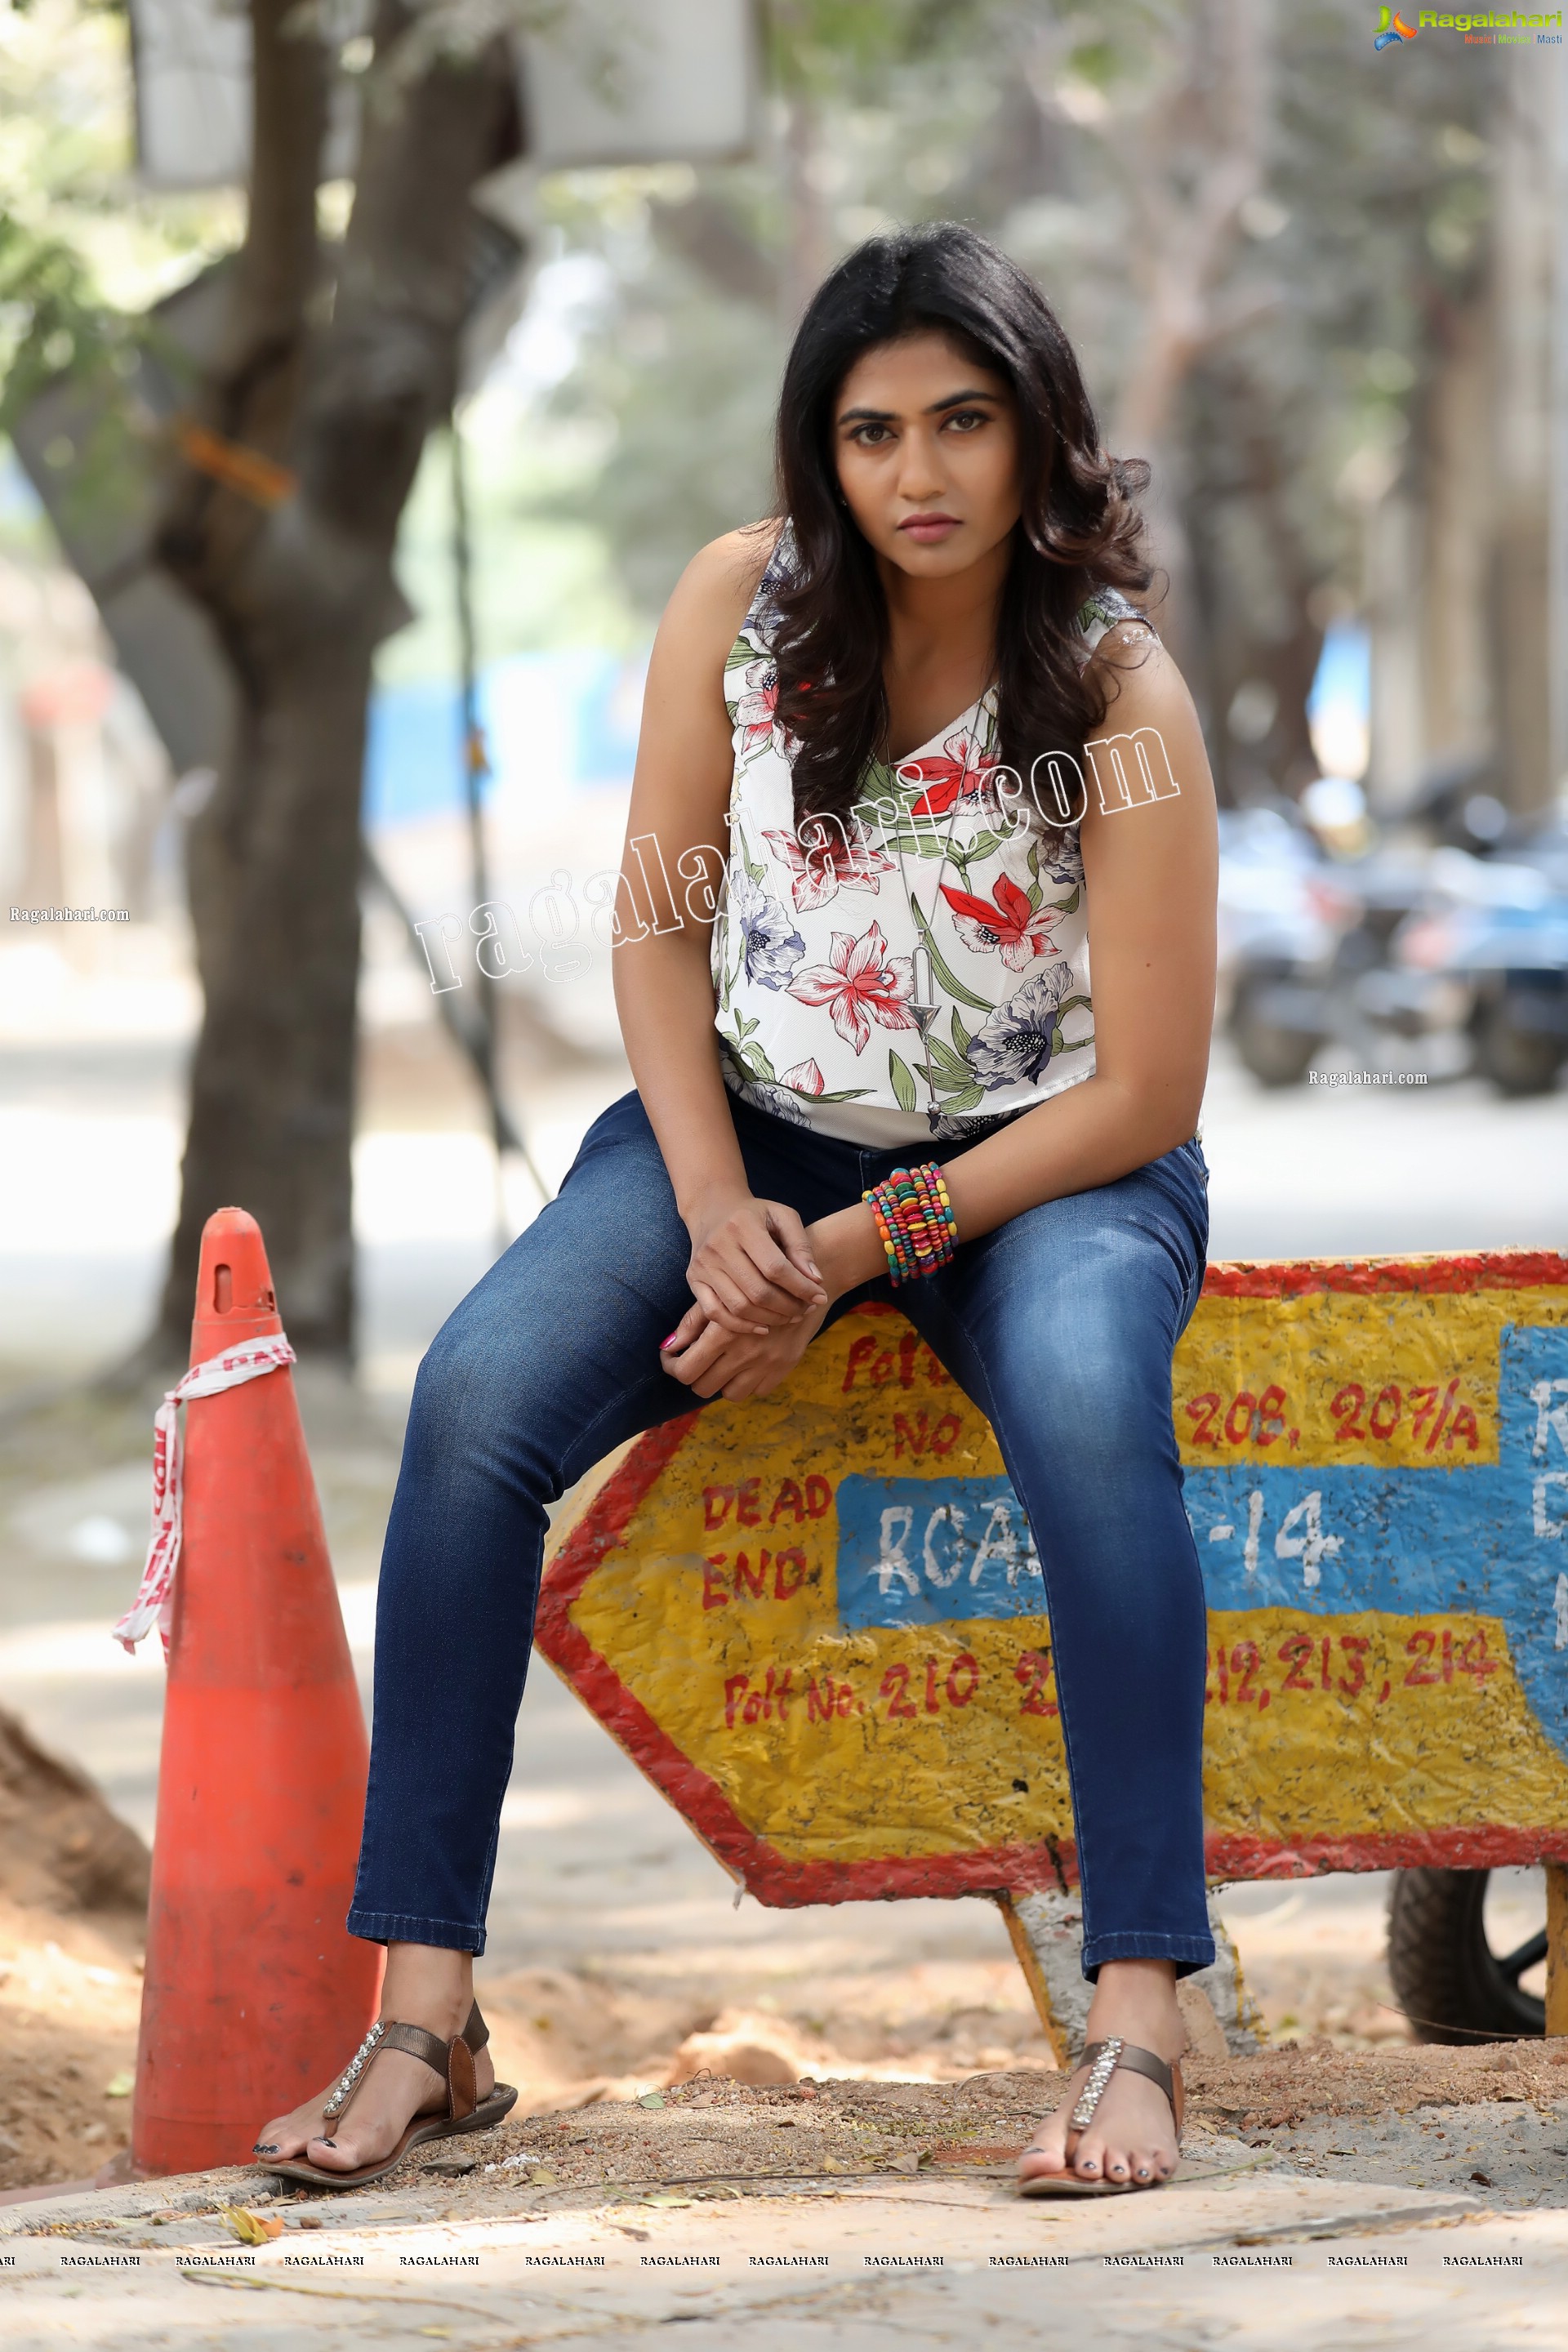 Raja Kumari YN in White Floral Printed Top and Jeans Exclusive Photo Shoot